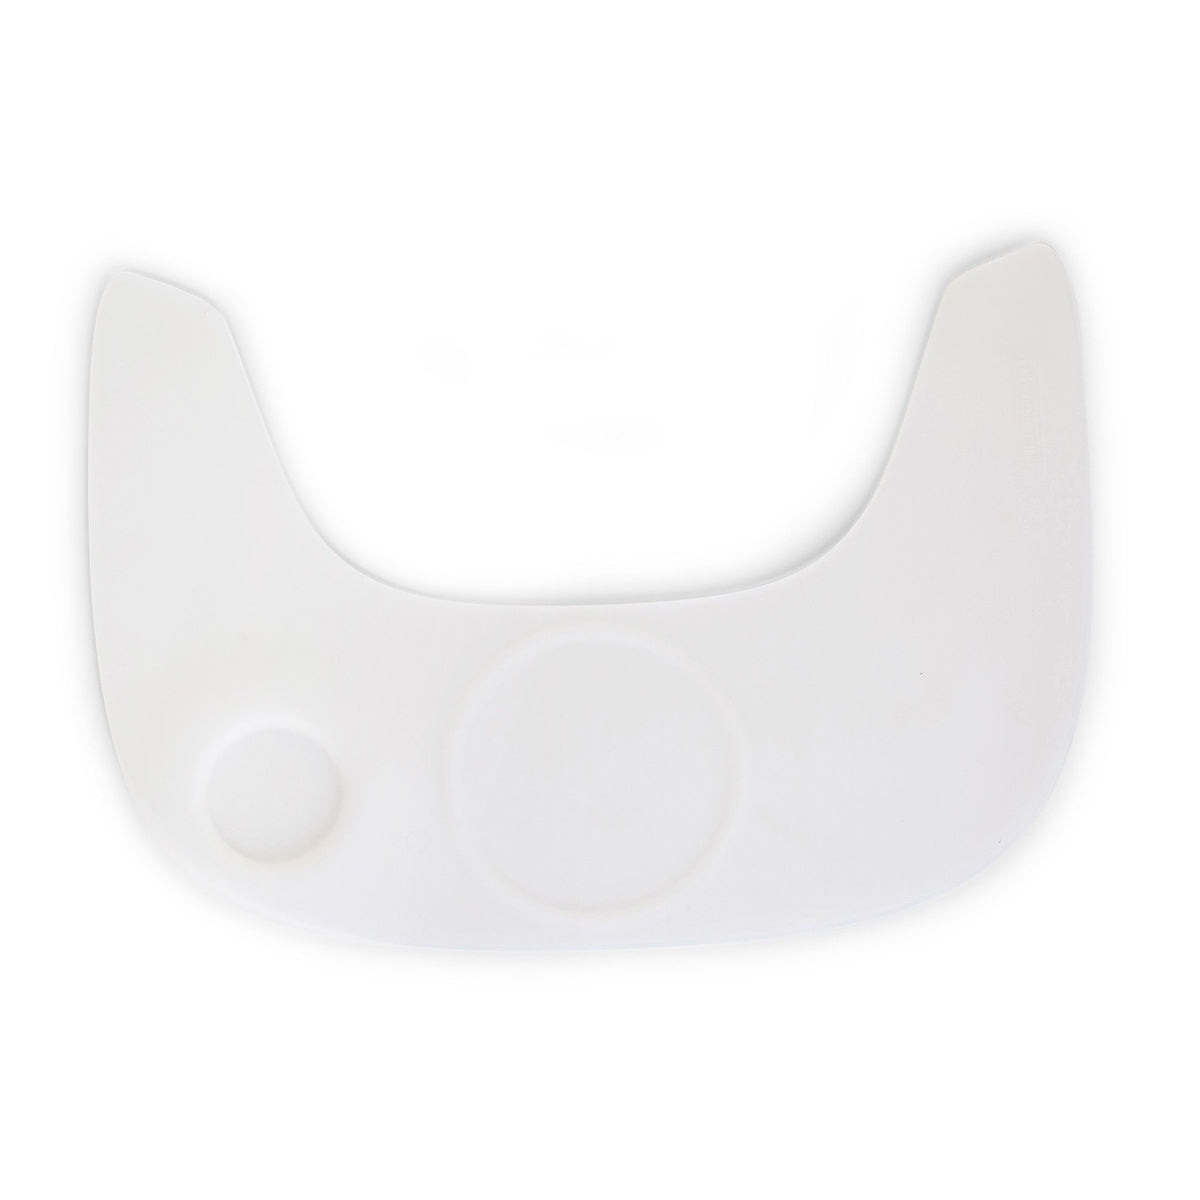 Childhome Evolu Silicone Feeding Tray Cover (Transparent) **Tray is Sold Separate**